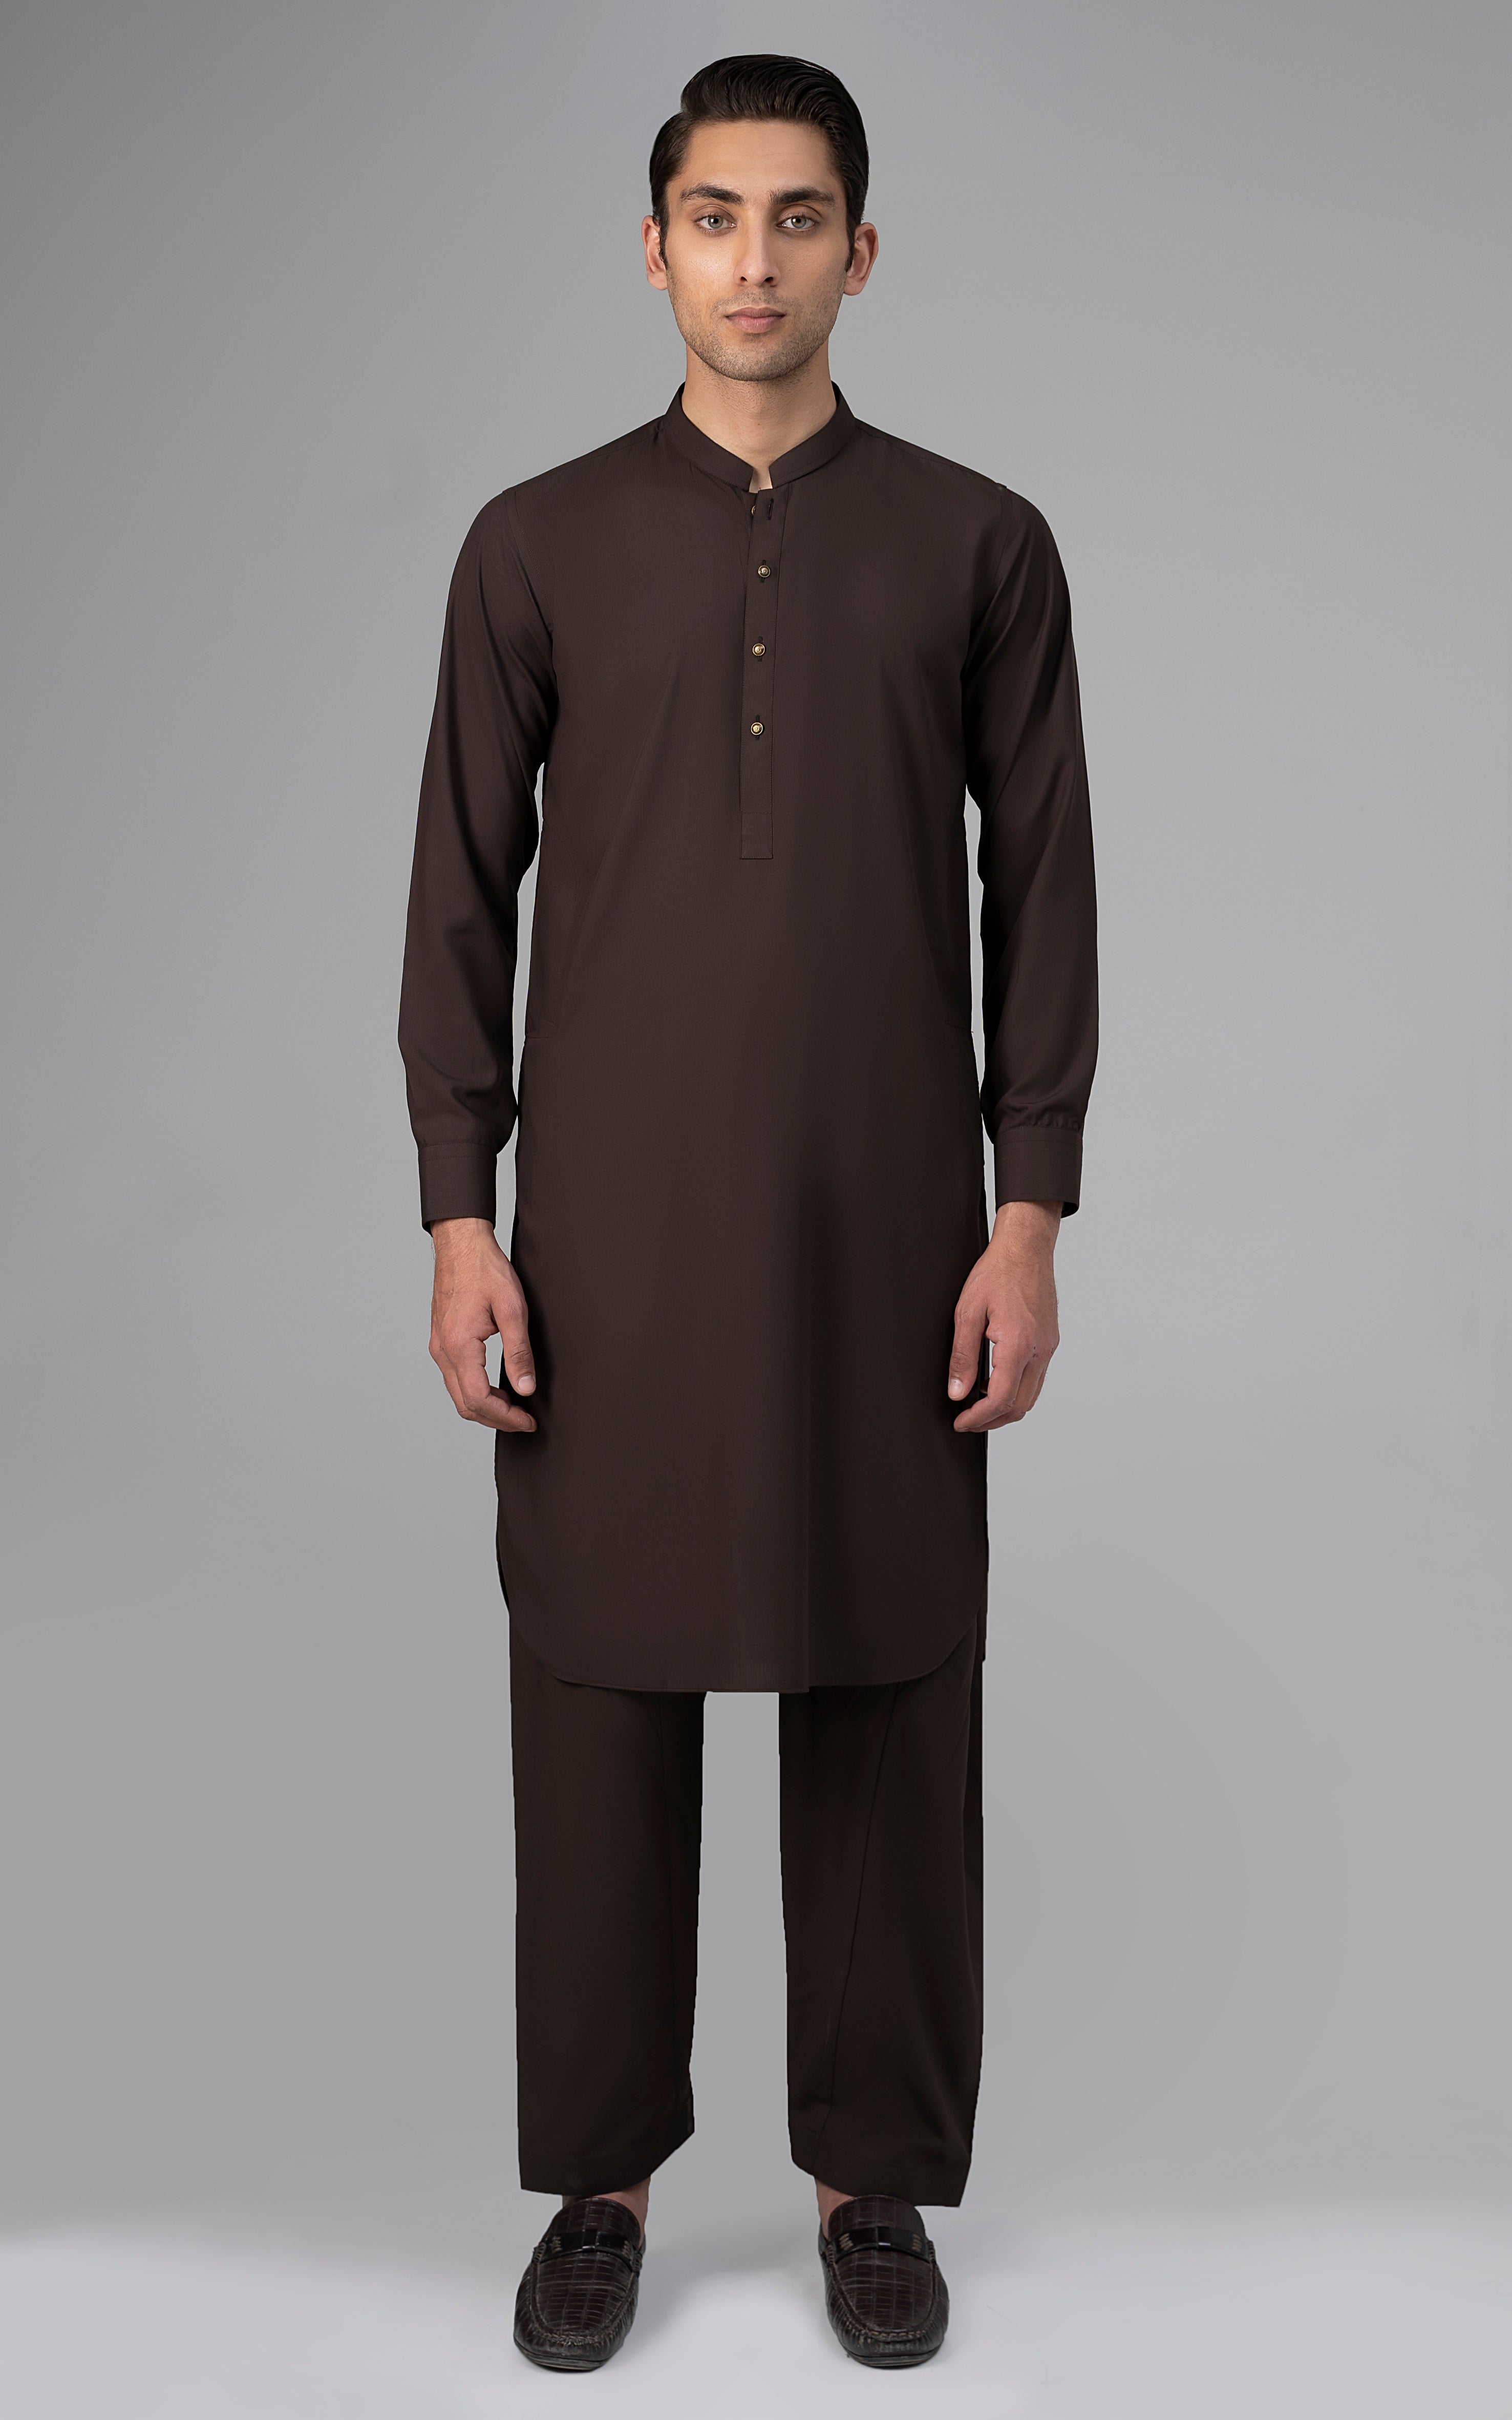 TEXTURED BLENDED WASH & WEAR - SIGNATURE COLLECTION BROWN